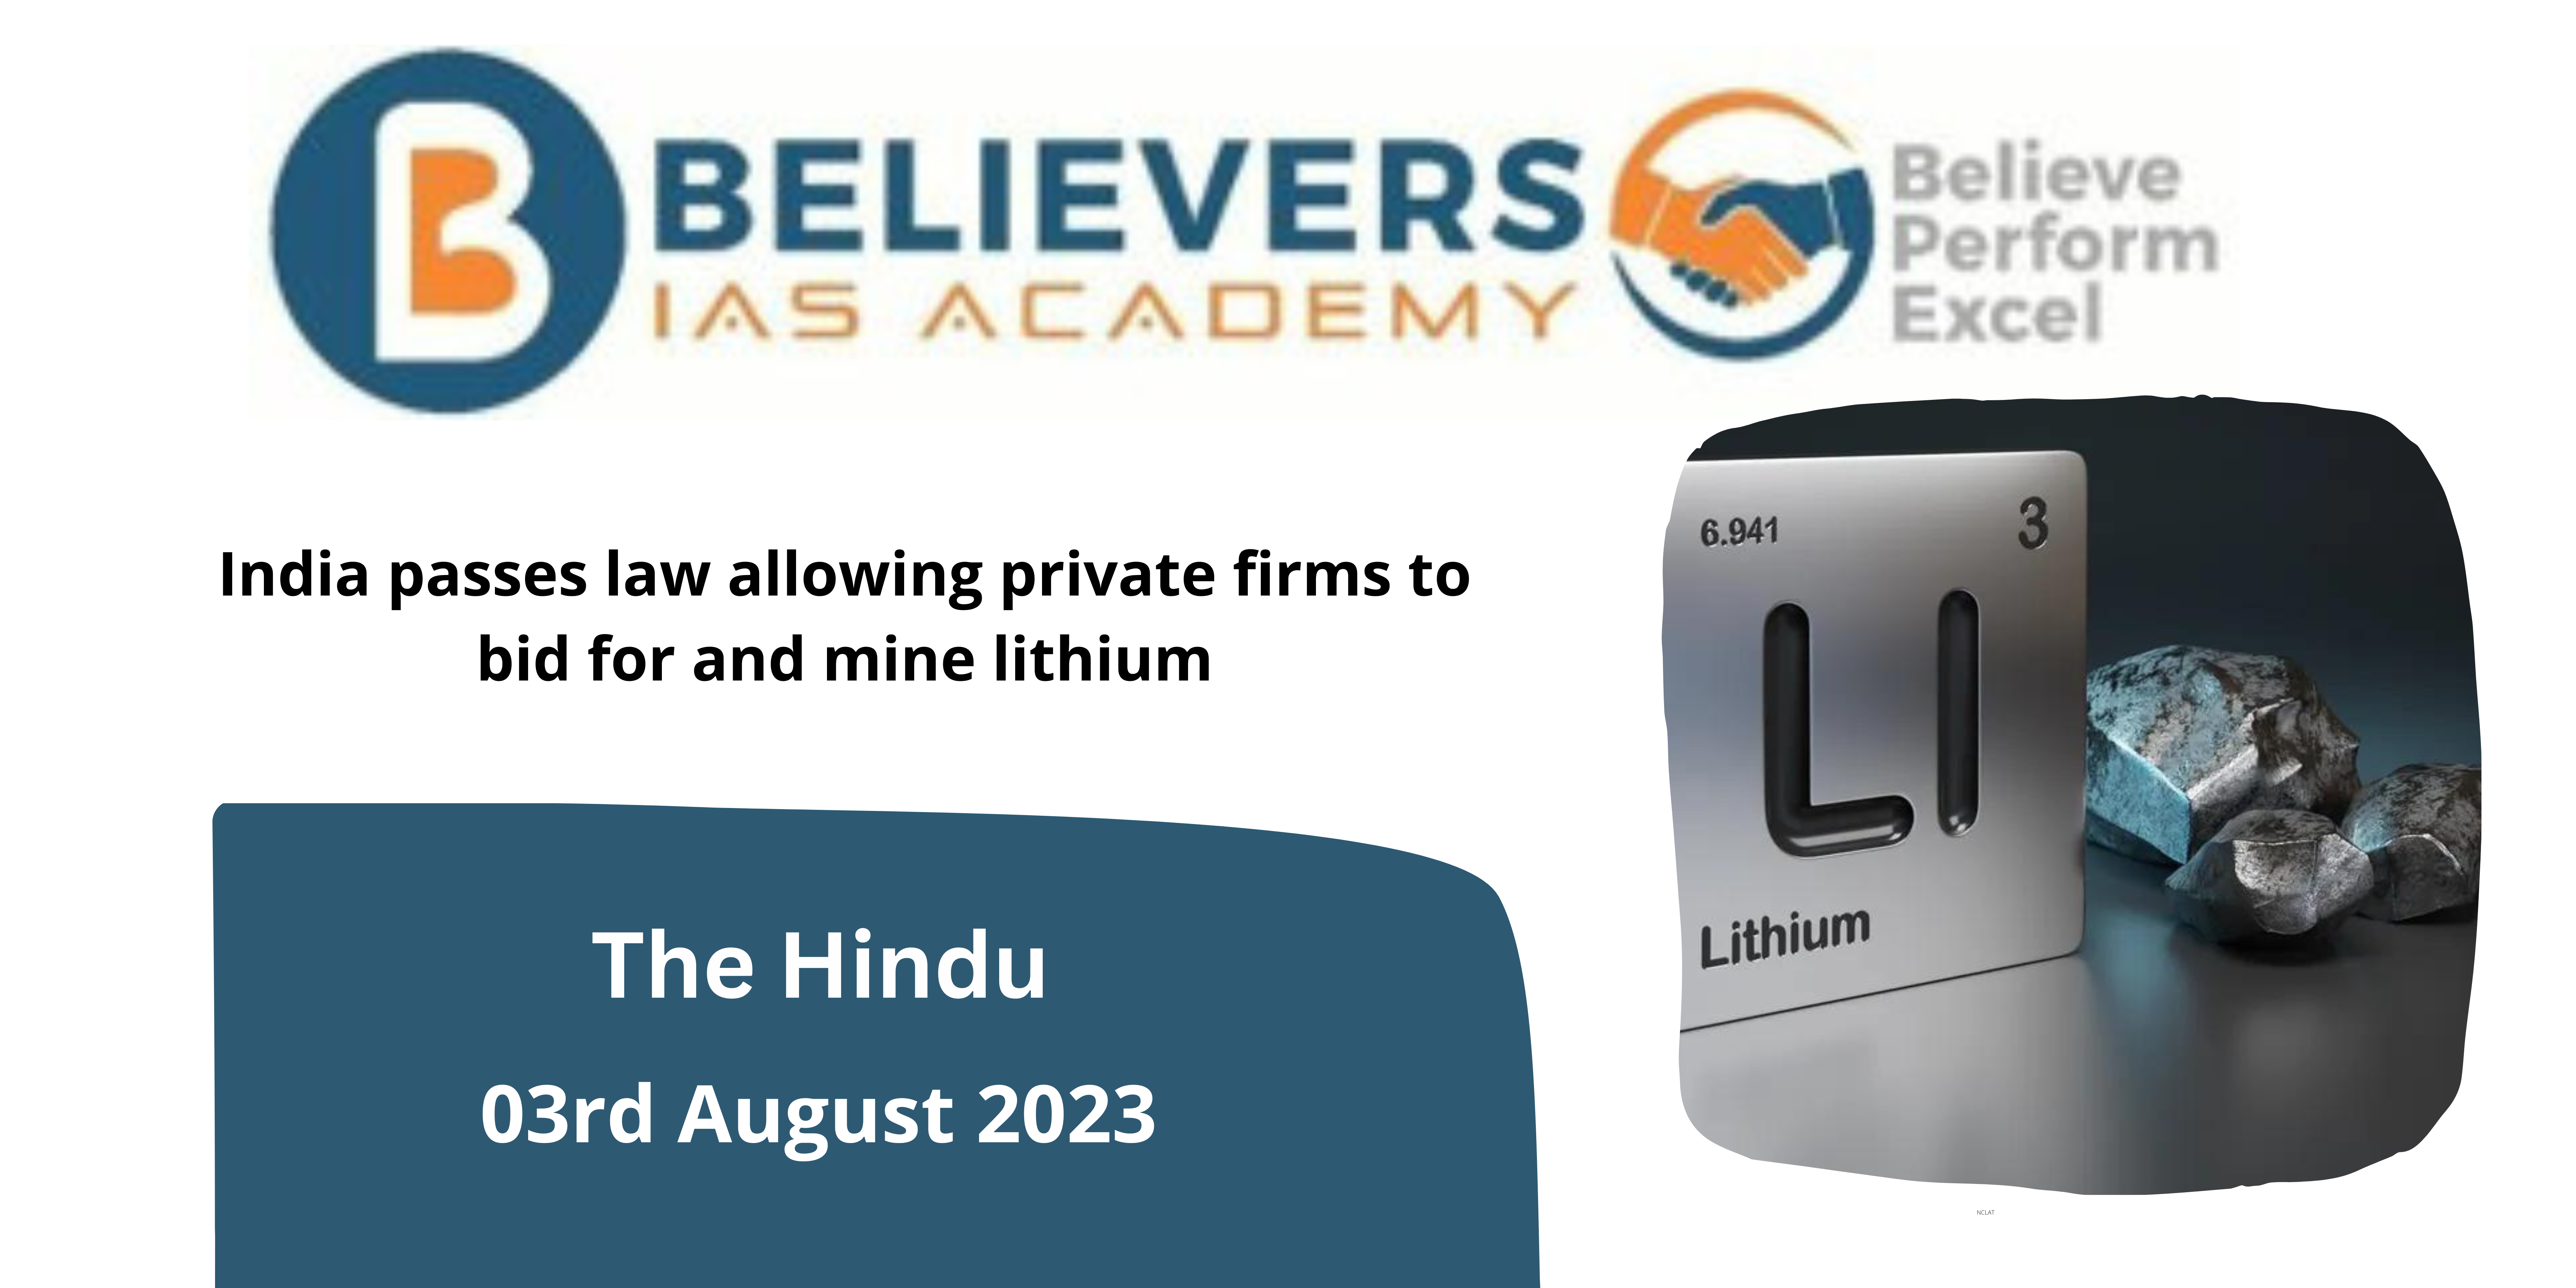 India passes law allowing private firms to bid for and mine lithium